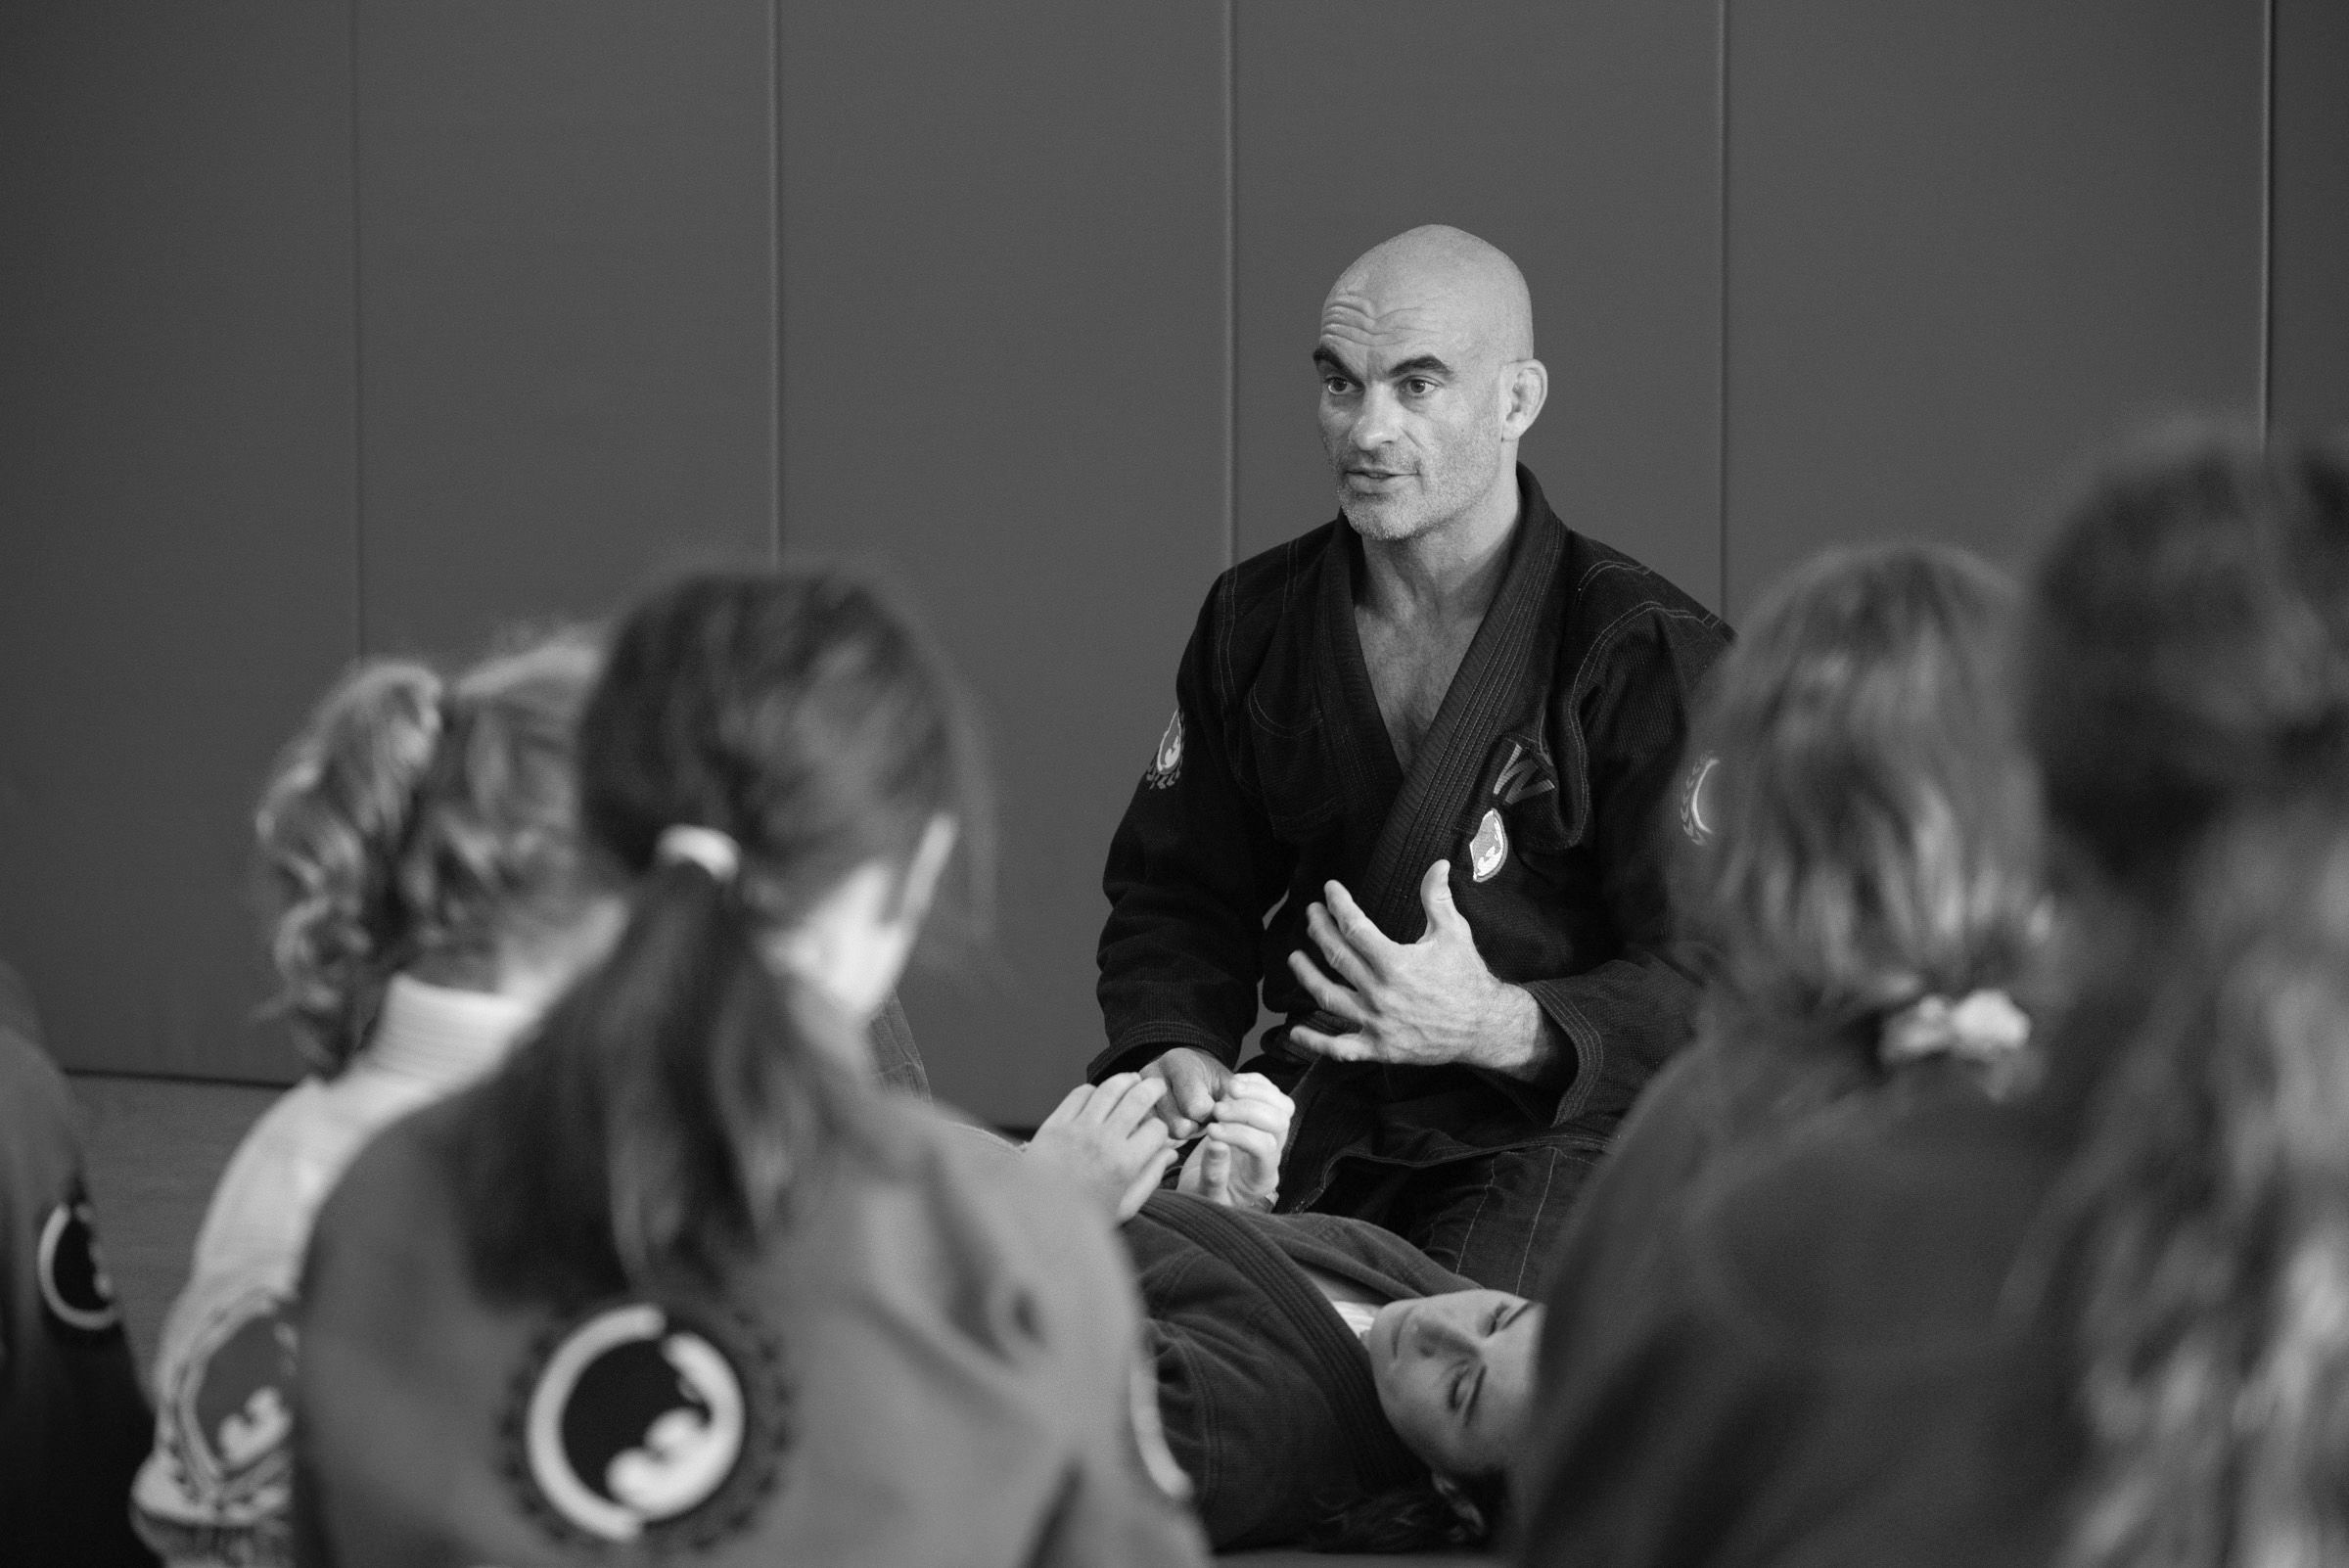 A man teaching karate to a group of people.